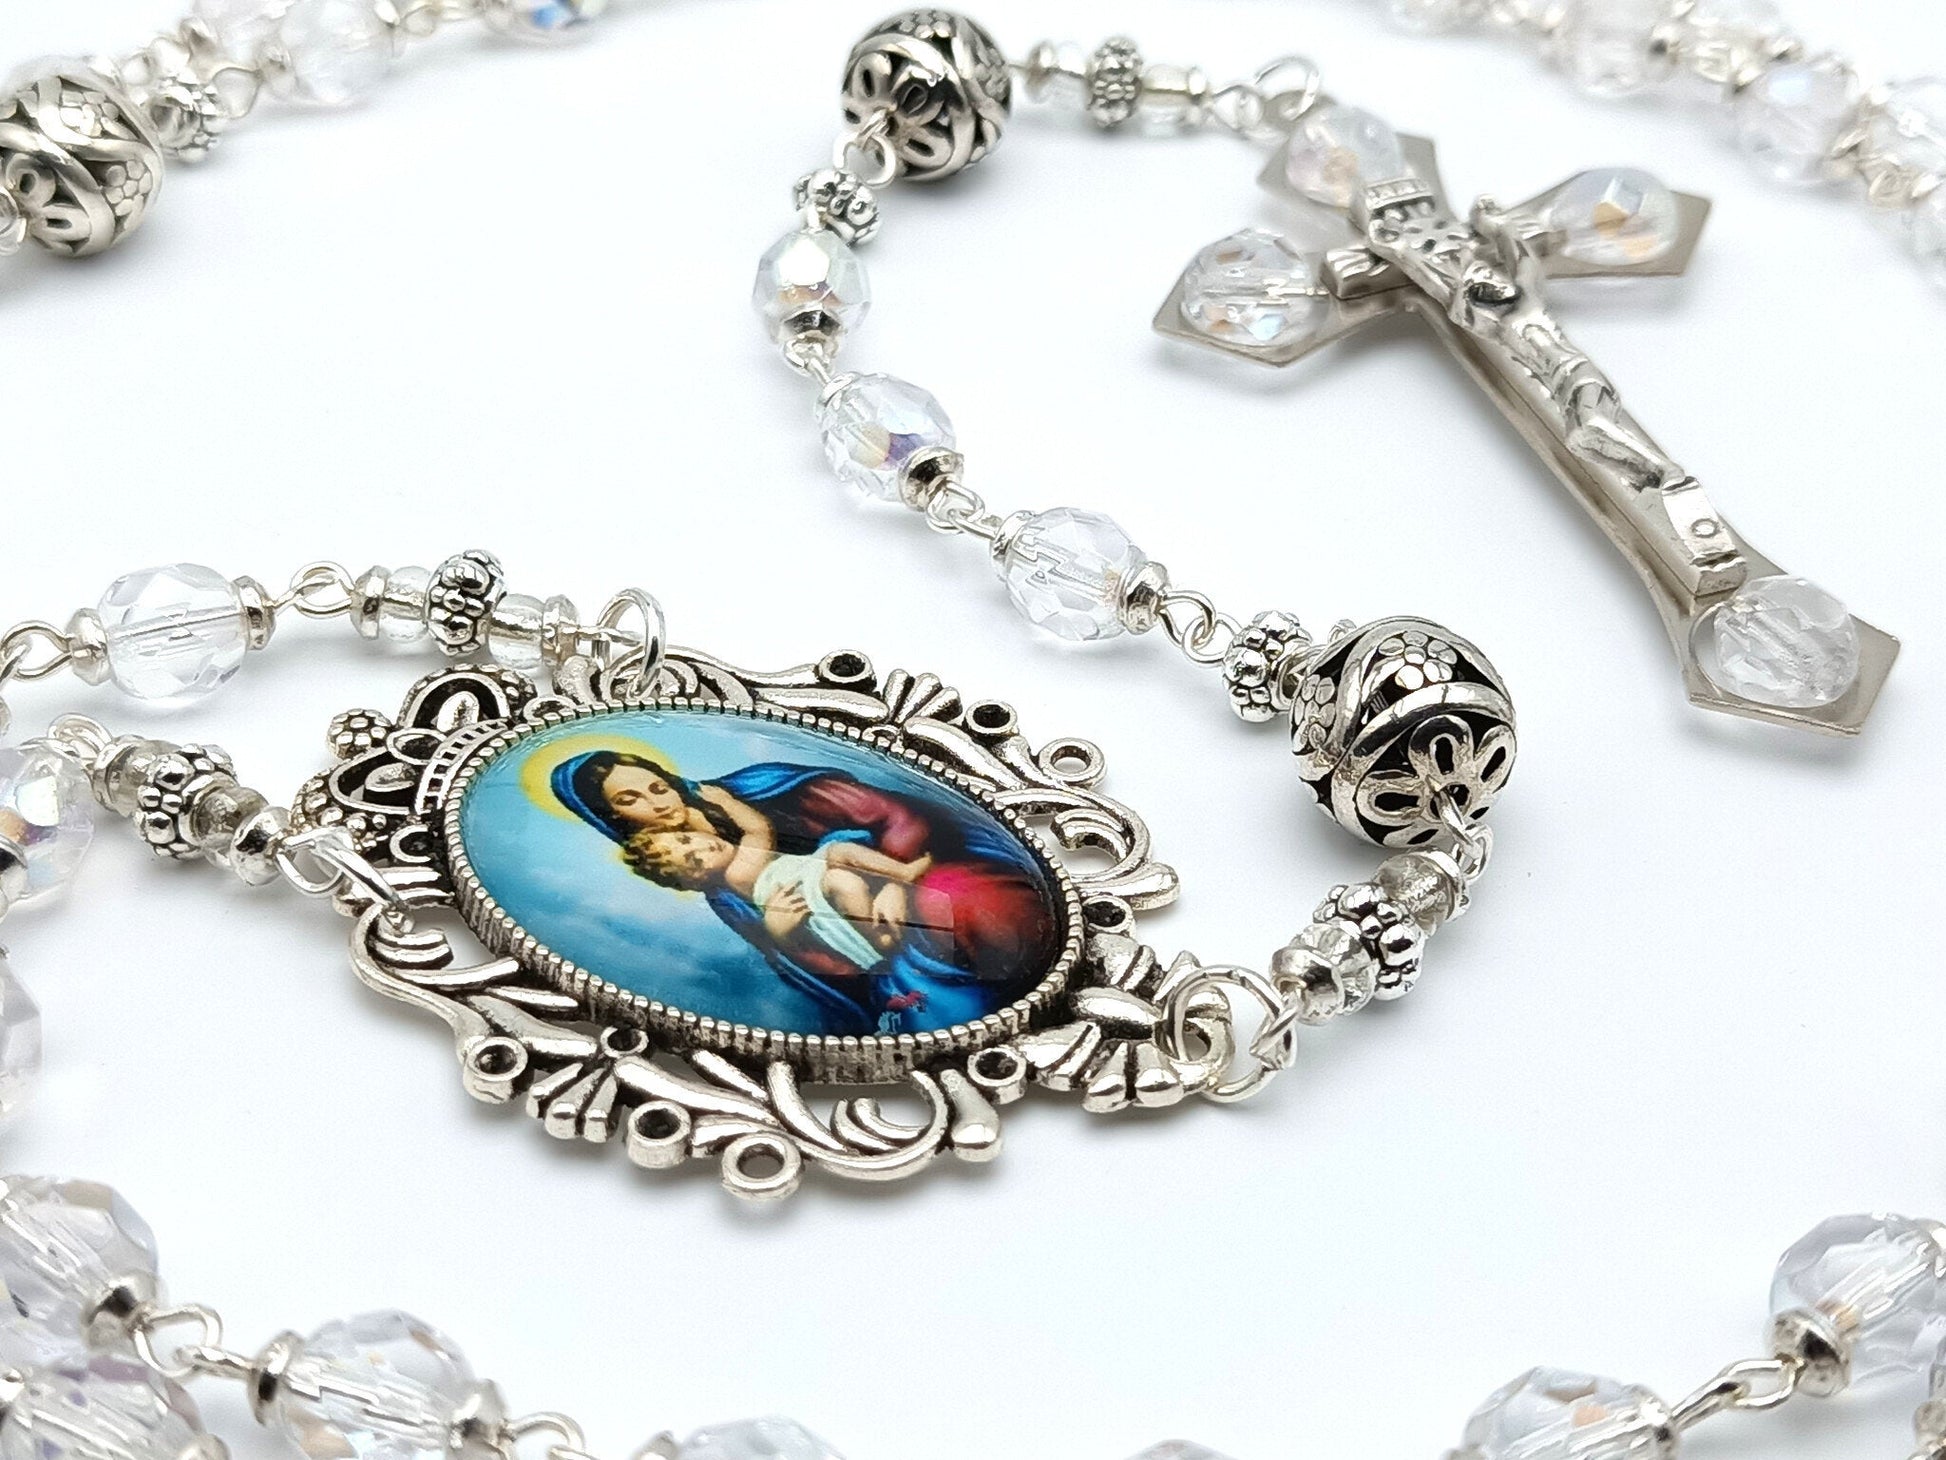 Virgin Mary and Child unique rosary beads with clear crystal and silver beads, silver and crystal crucifix and silver picture centre medal.